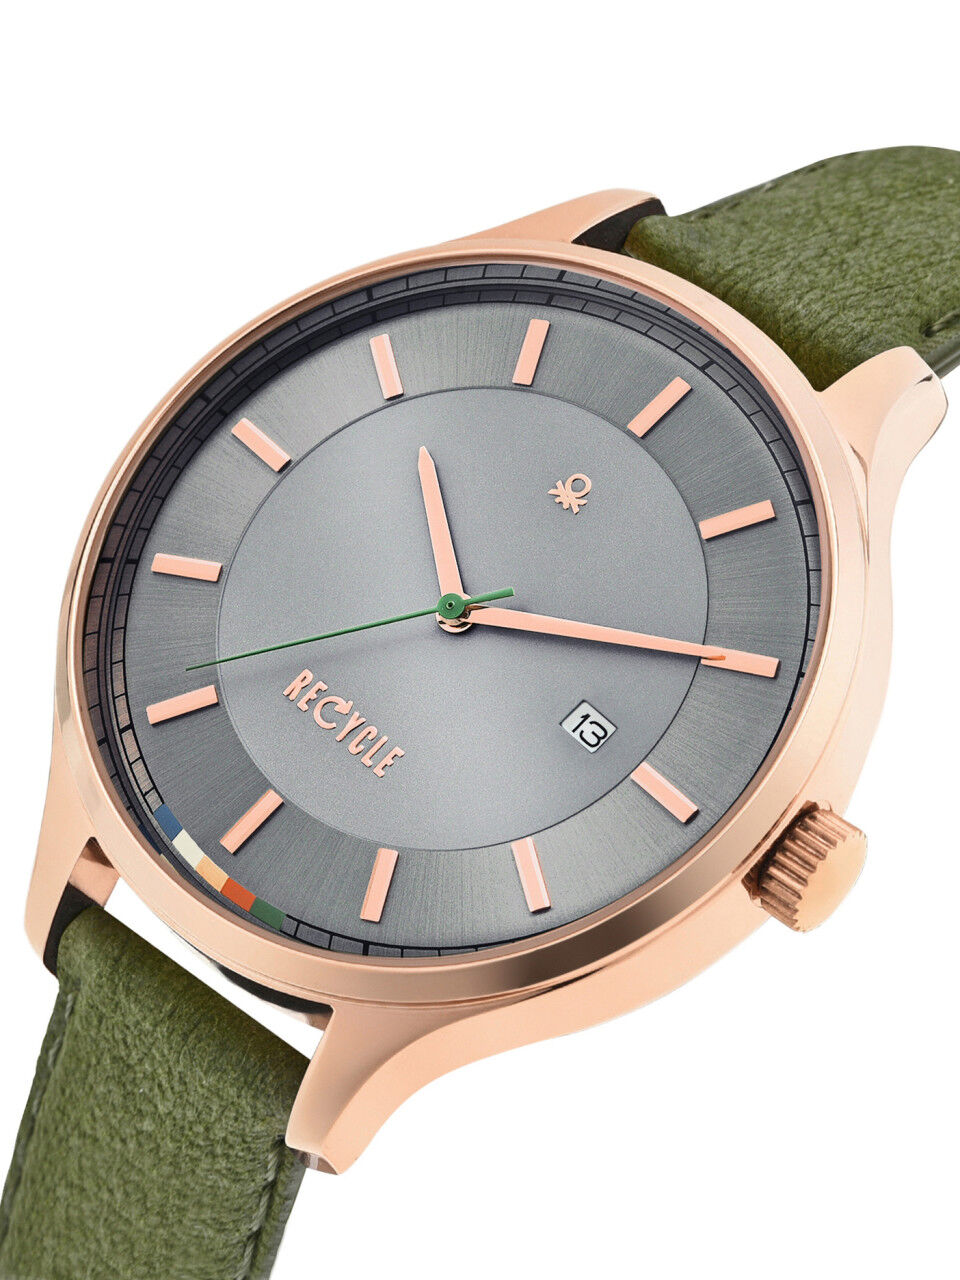 Buy United Colors of Benetton Mens 44 mm Light Grey Dial Silicone Analogue  Watch - UWUCG0202 at Amazon.in